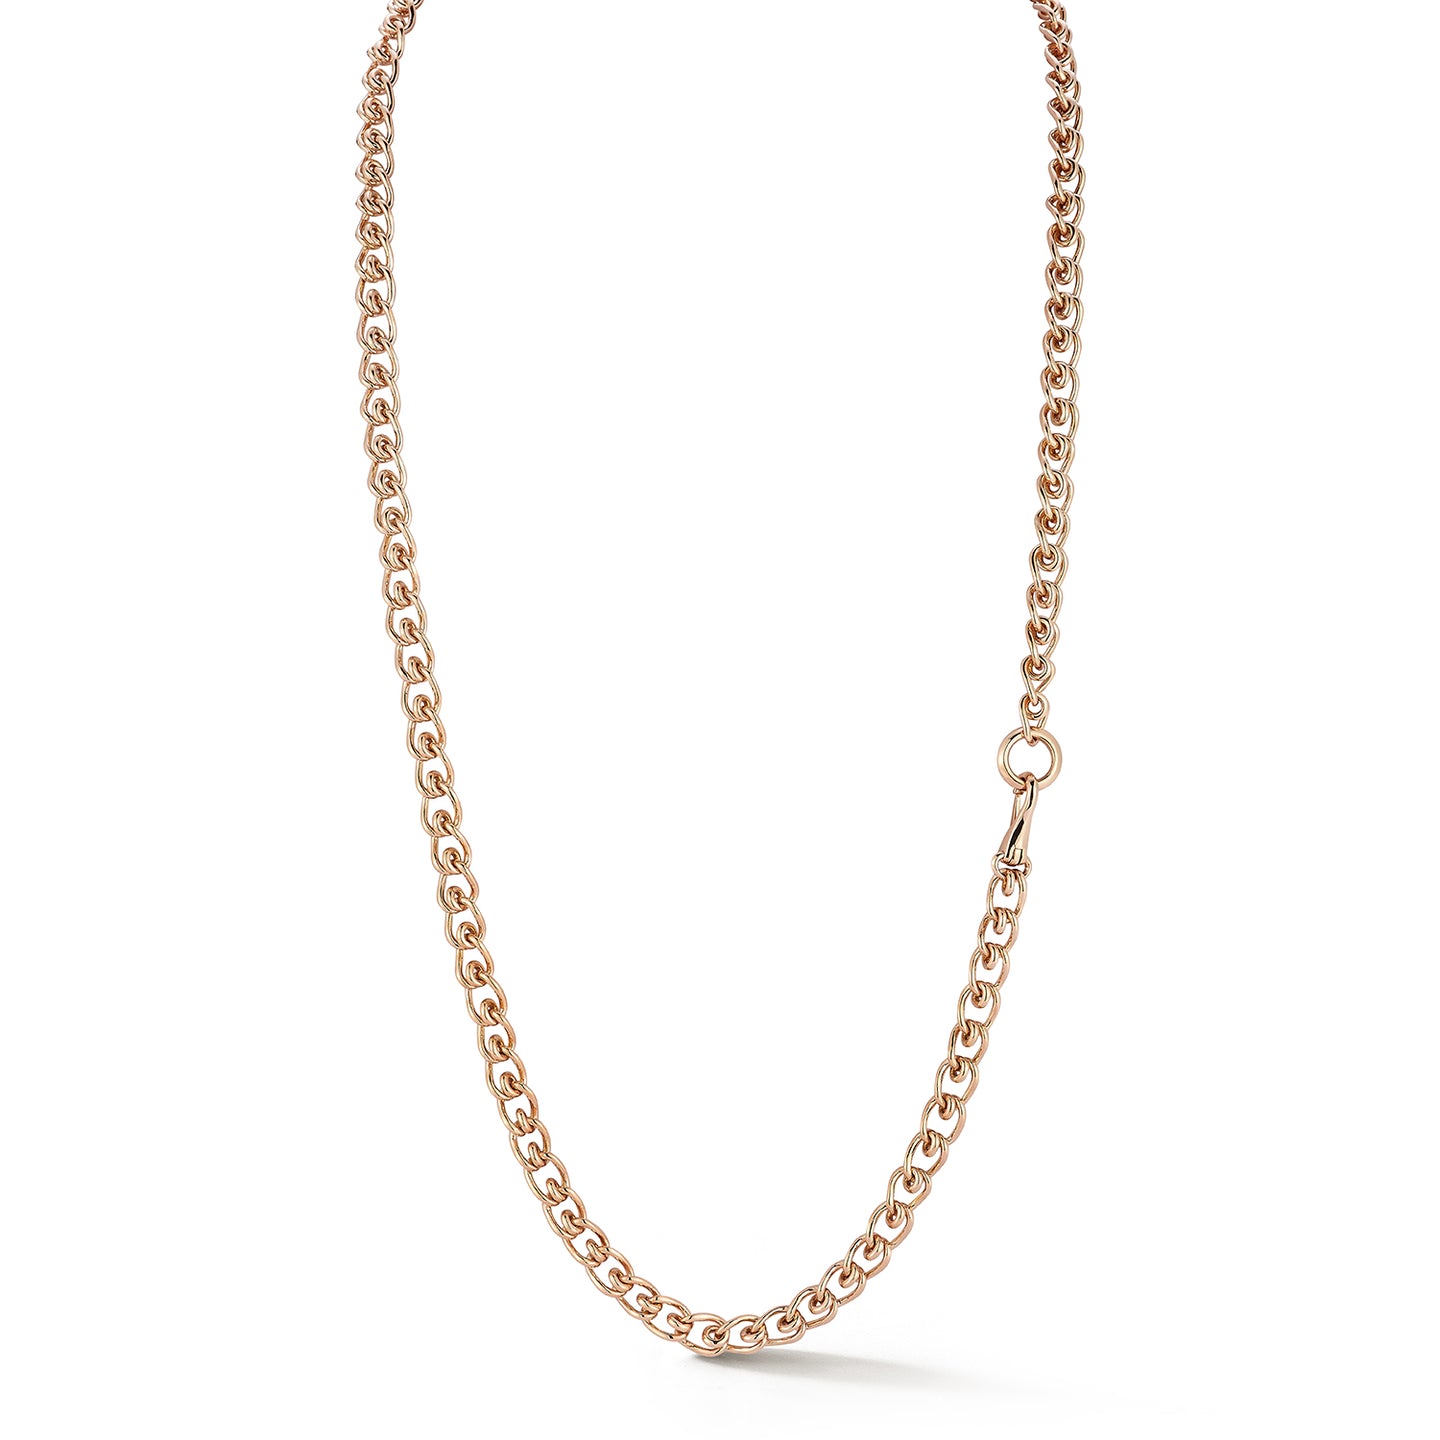 HUXLEY 18K ROSE GOLD COIL CHAIN NECKLACE